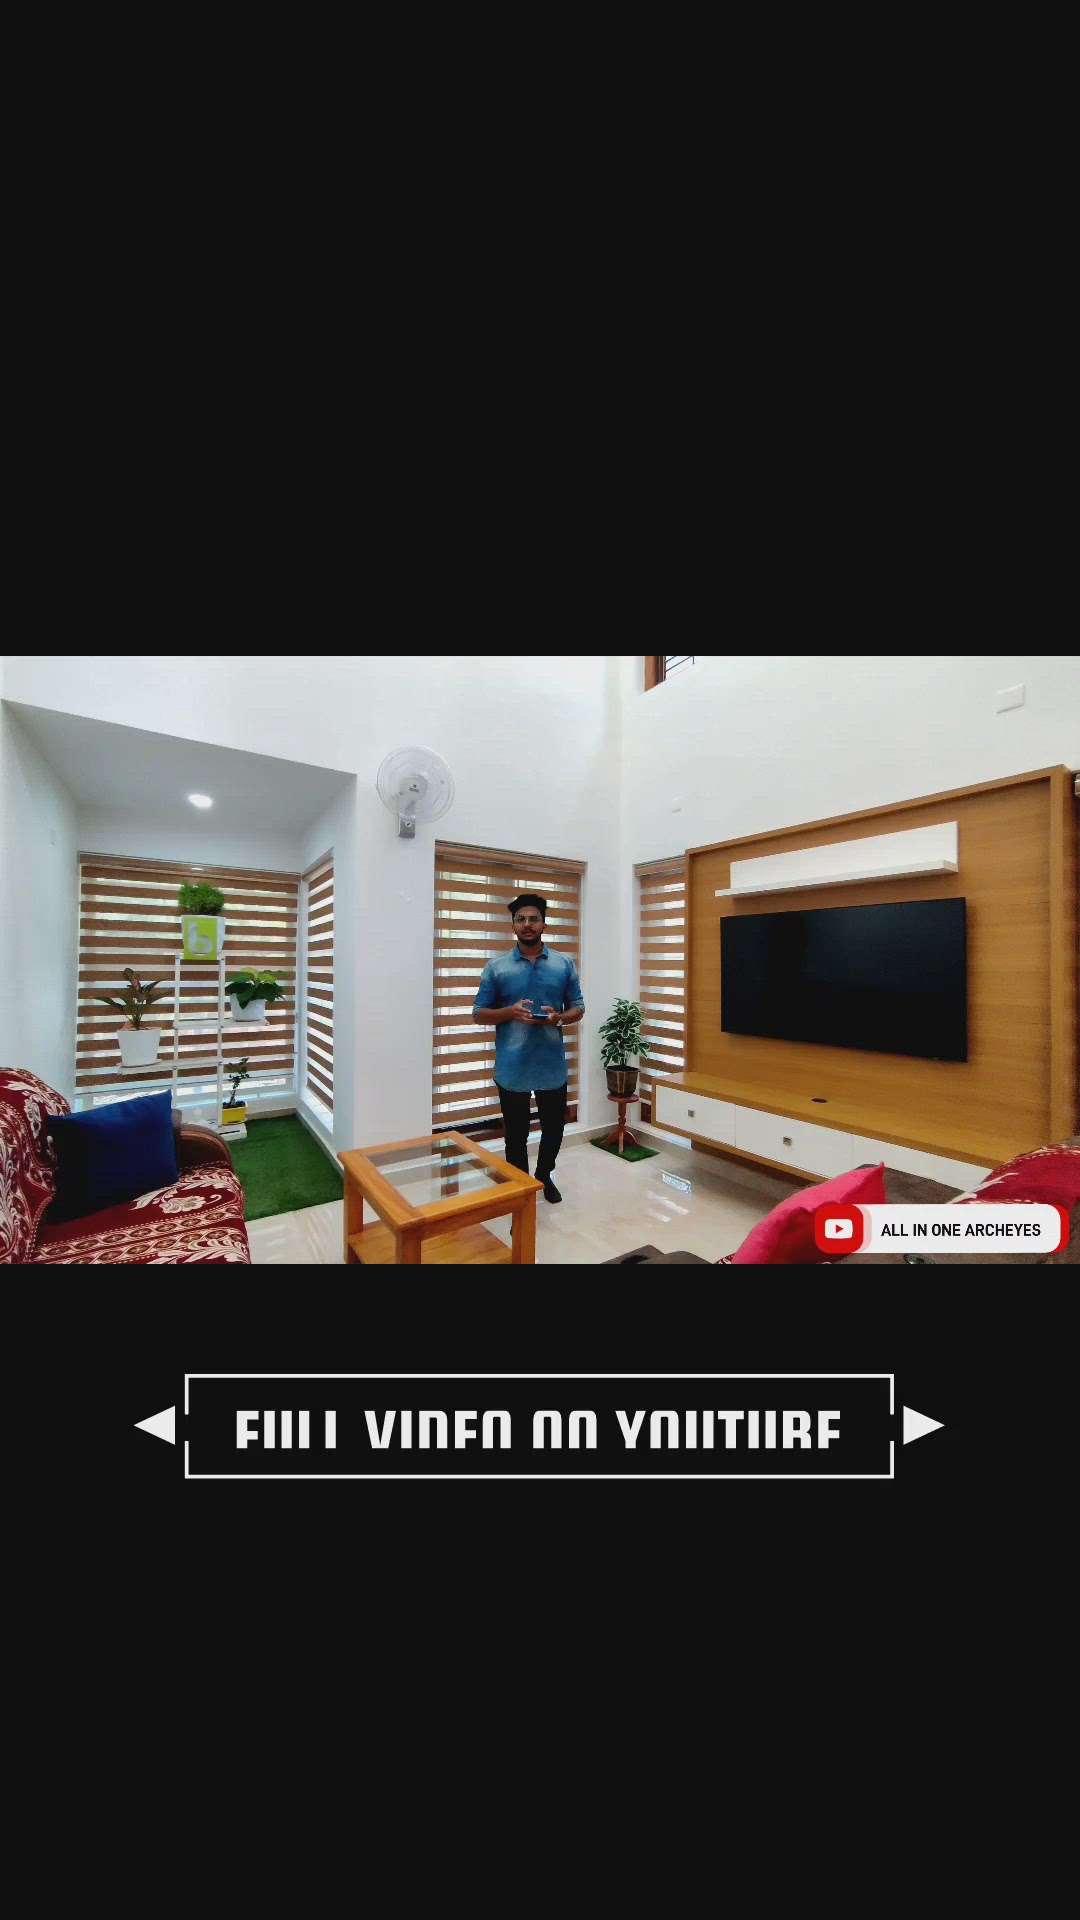 budget friendly interior😍 full video on youtube channel #modernhome #HomeAutomation #ElevationHome #HomeDecor #homesweethome #HouseDesigns #40LakhHouse #InteriorDesigner #HouseinteriorDesigns #KitchenInterior #ContemporaryHouse #architecturedesigns #Architectural&nterior #HouseRenovation #Residencedesign 
 #residenceproject #residentialbuilding #HouseDesigns #50LakhHouse #ContemporaryHouse #SmallHouse #40LakhHouse #3500sqftHouse #HouseConstruction #HomeAutomation #ElevationHome #HomeDecor #homesweethome #homedecoration #homedesigne #MrHomeKerala #architecturedesigns #keralaarchitectures #architecturekerala #lowbudget #lowcosthouse #lowcost #lowcosthomes #lowcostconstruction #lowbudgethousekerala #budget_home_simple_interi #budgethouses